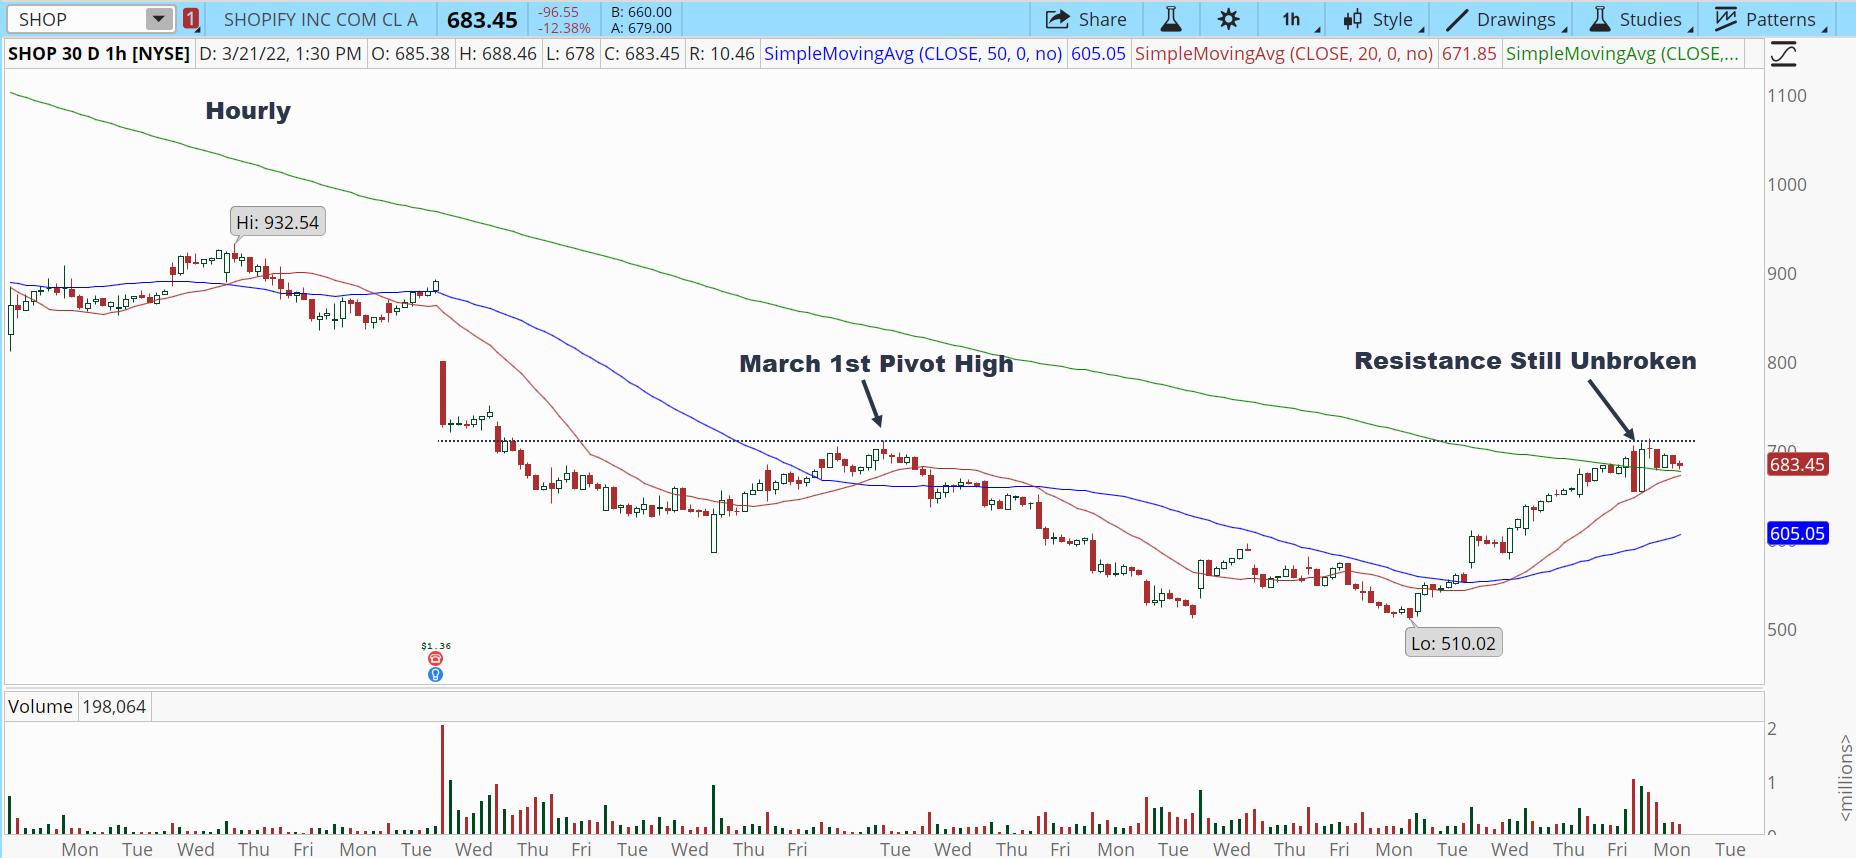 Shopify (SHOP) stock hourly chart showing resistance didn't break.